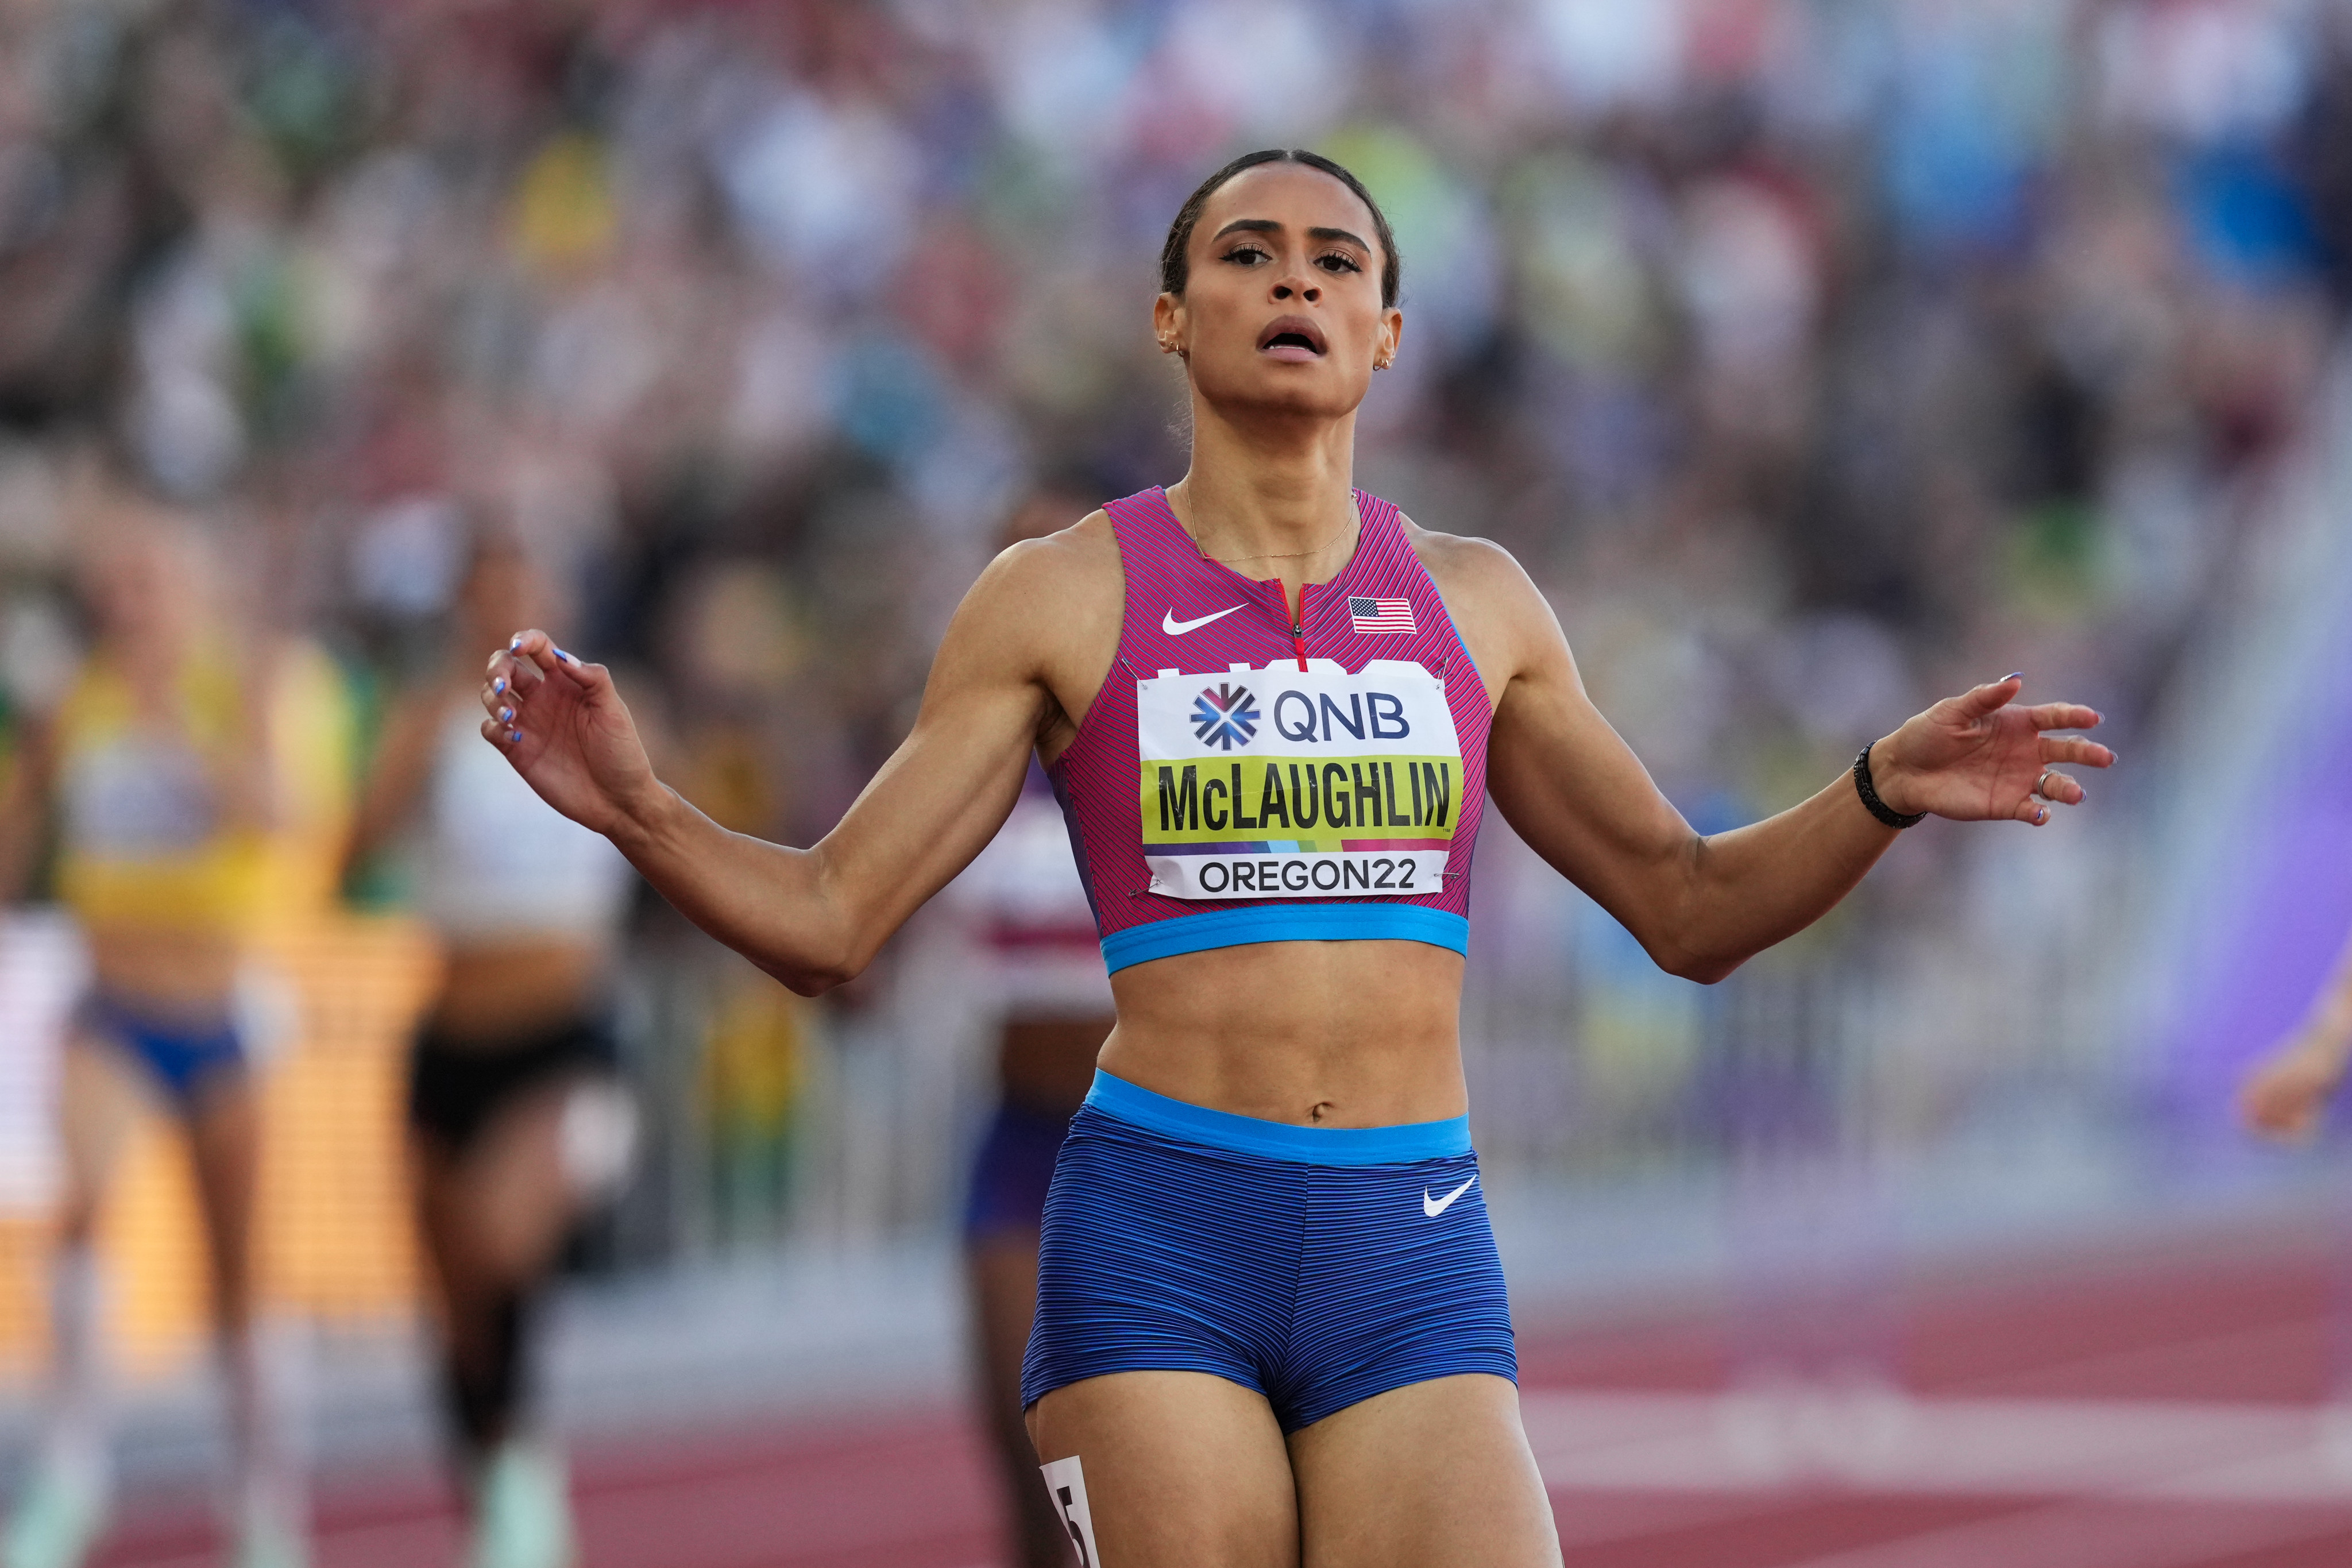 USA’s Sydney McLaughlin in action during the Women’s 400m Hurdles final. Photo: dpa